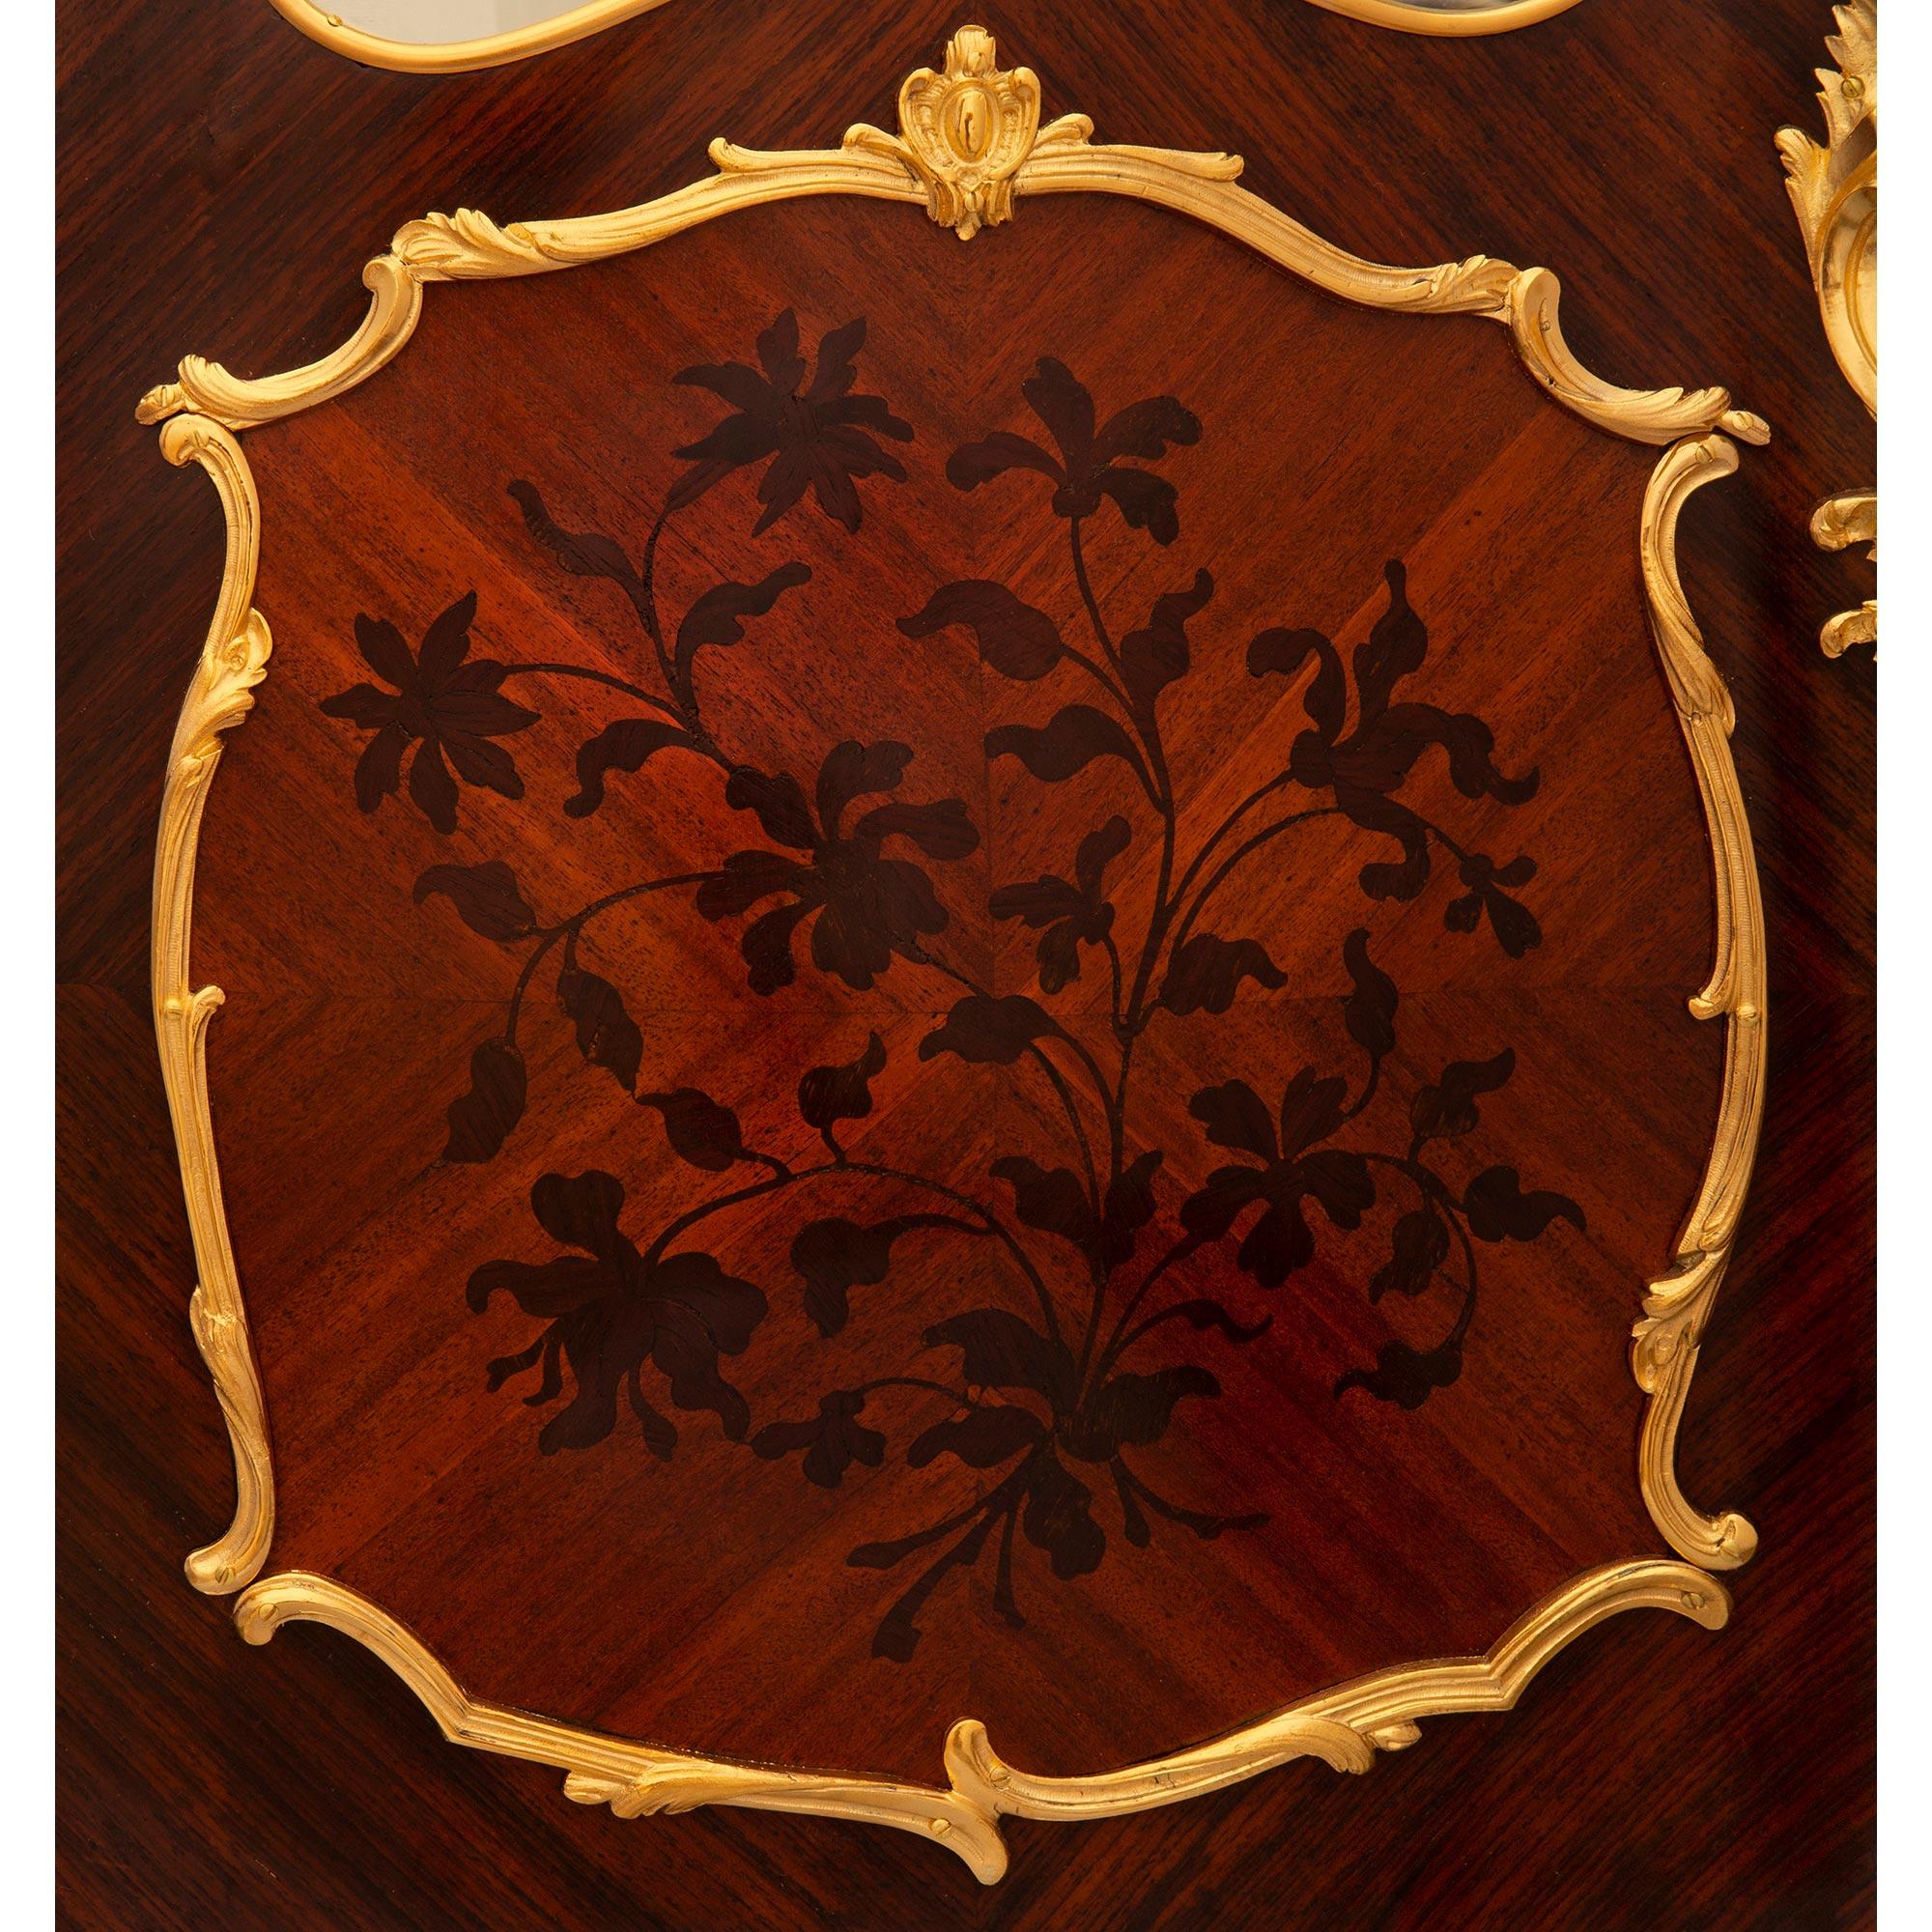 French 19th Century Louis XV St. Kingwood, Tulipwood and Ormolu Cabinet Vitrine For Sale 5